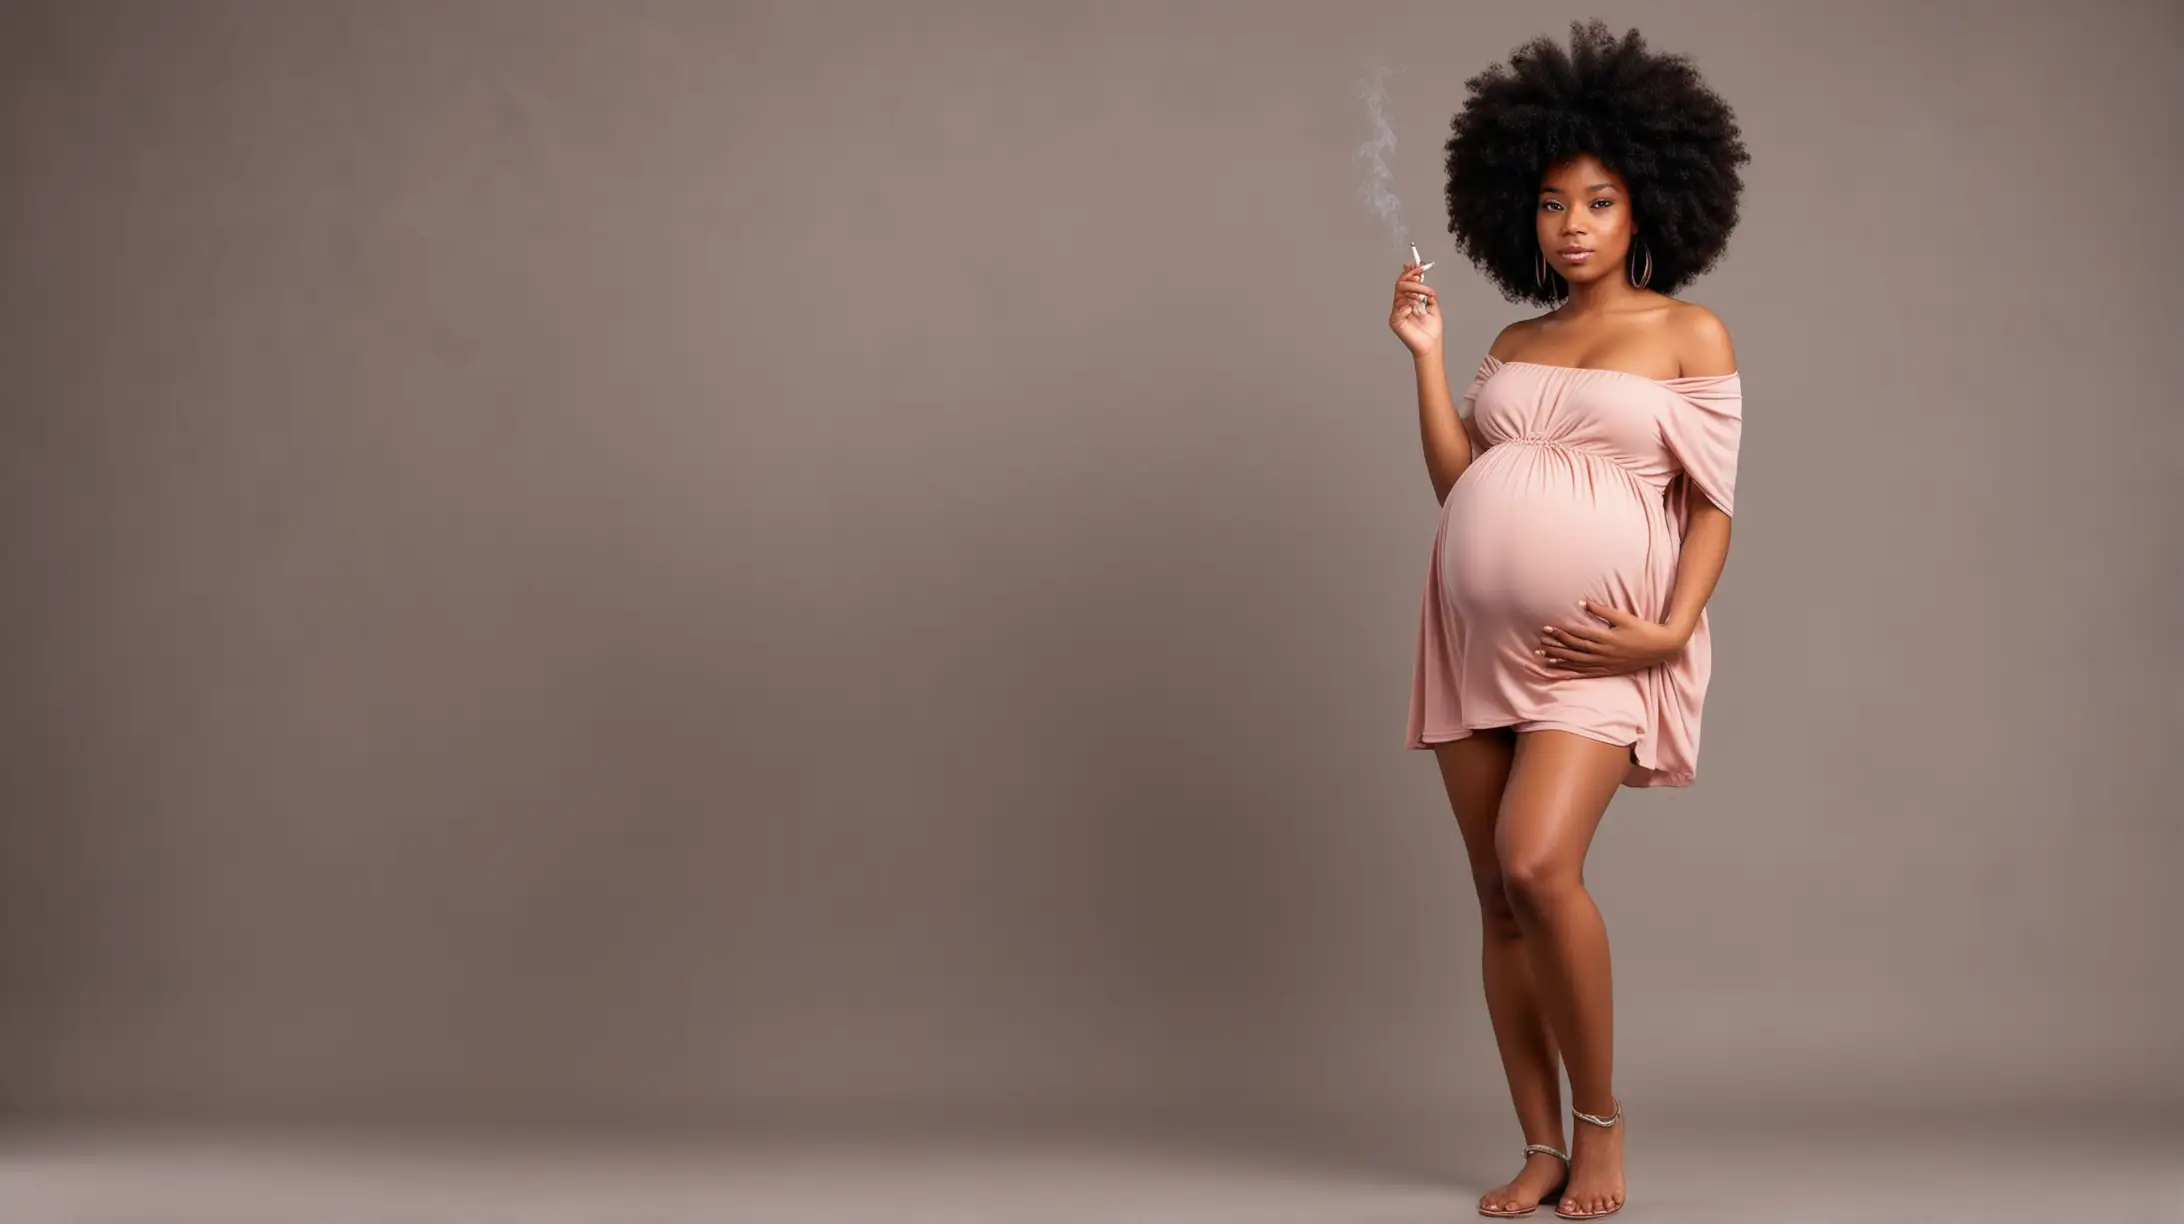 Full body shot of Beautiful Black woman pregnant with Afro and smoking a cigarette